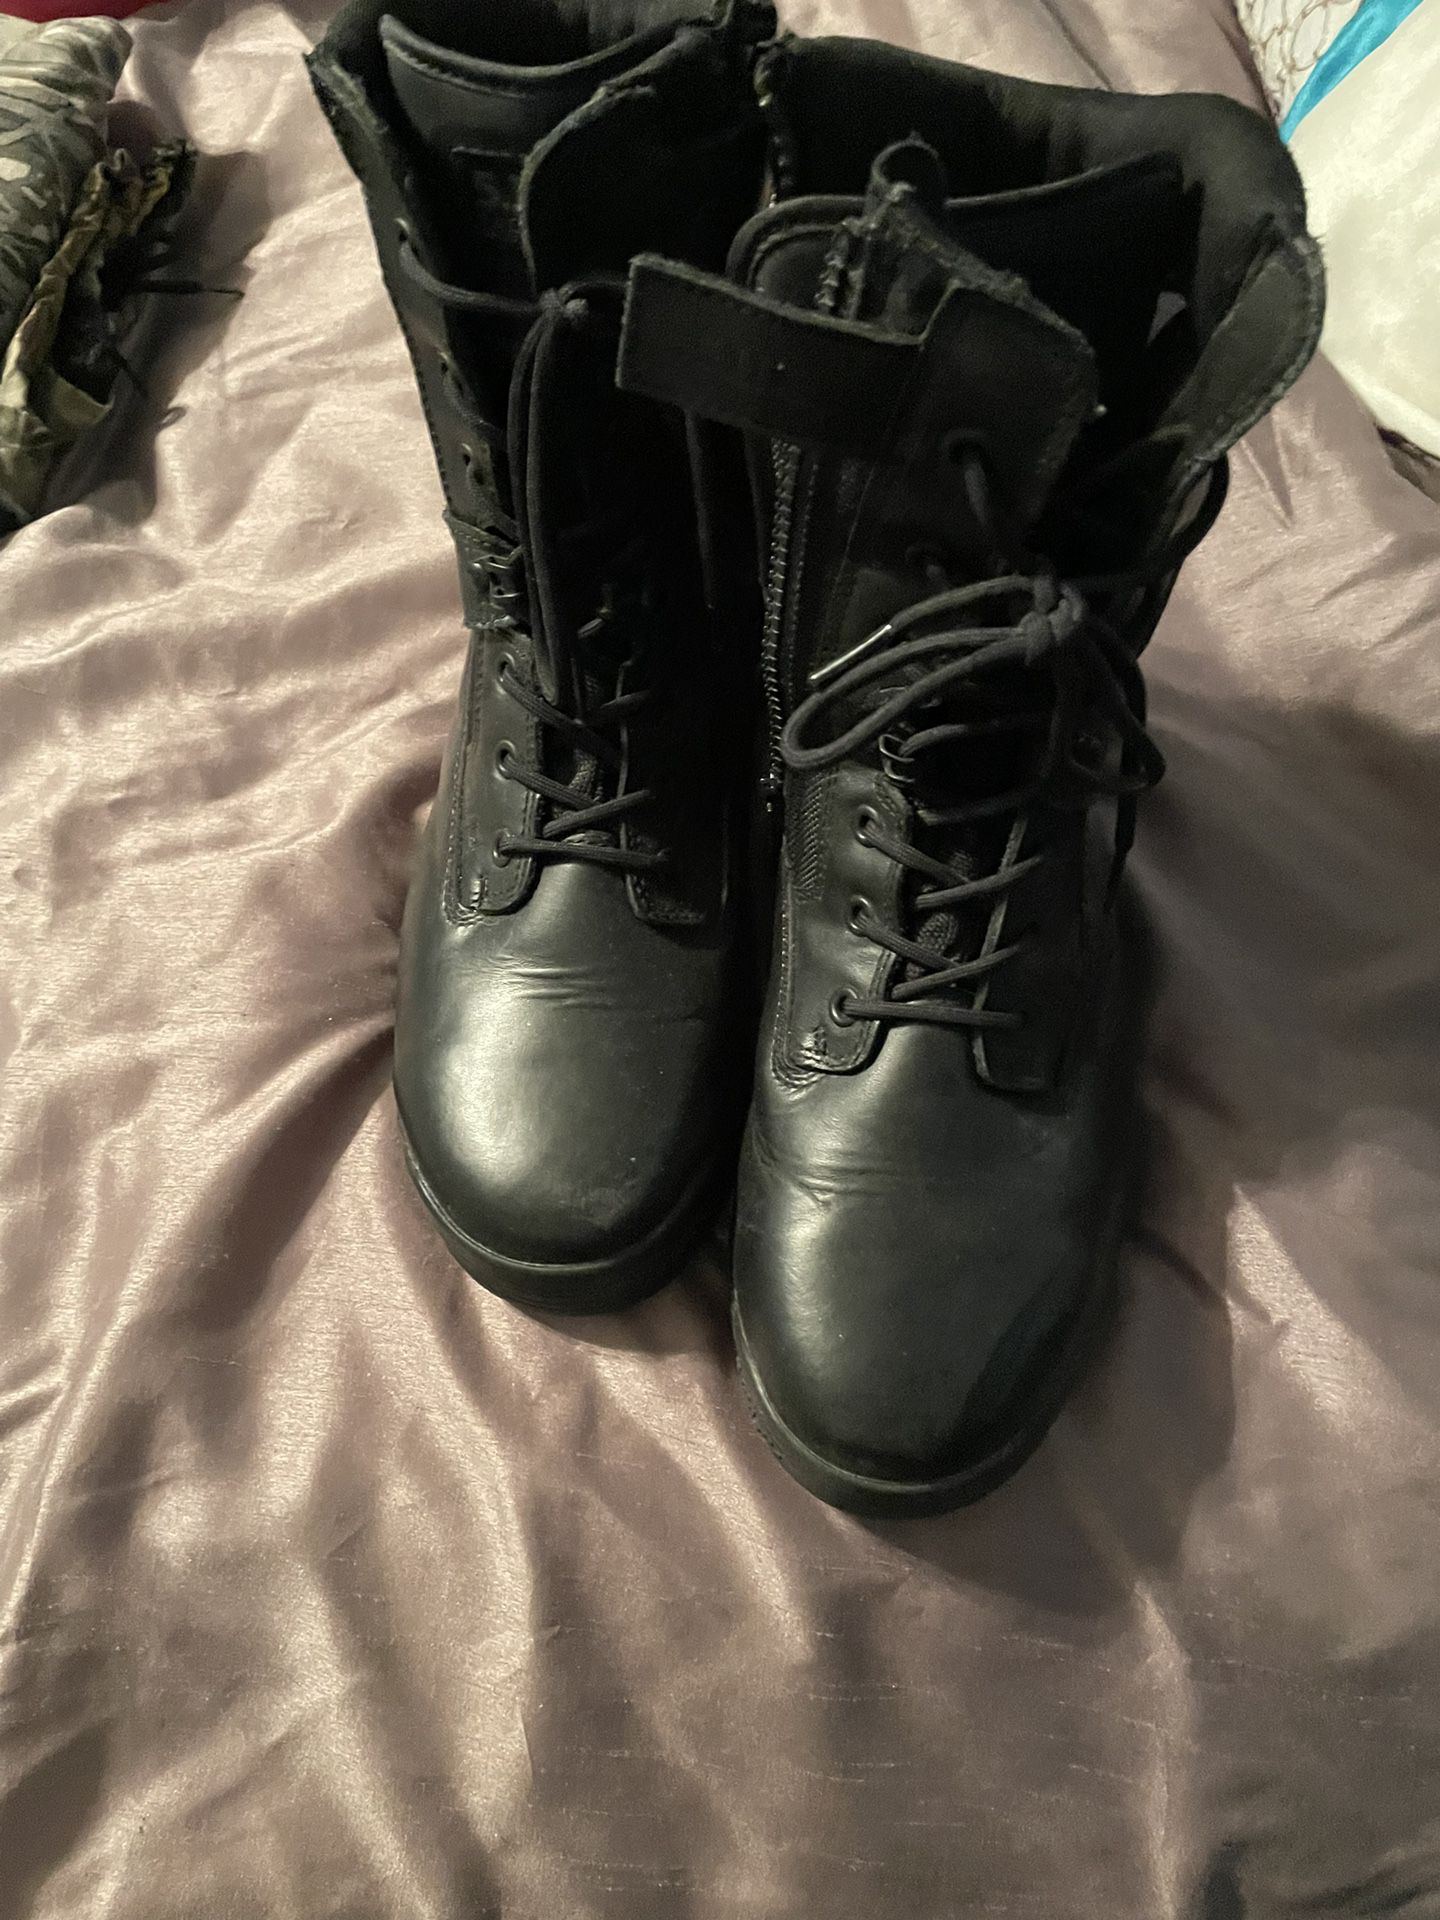 511 tactical boots, size 10 1/2